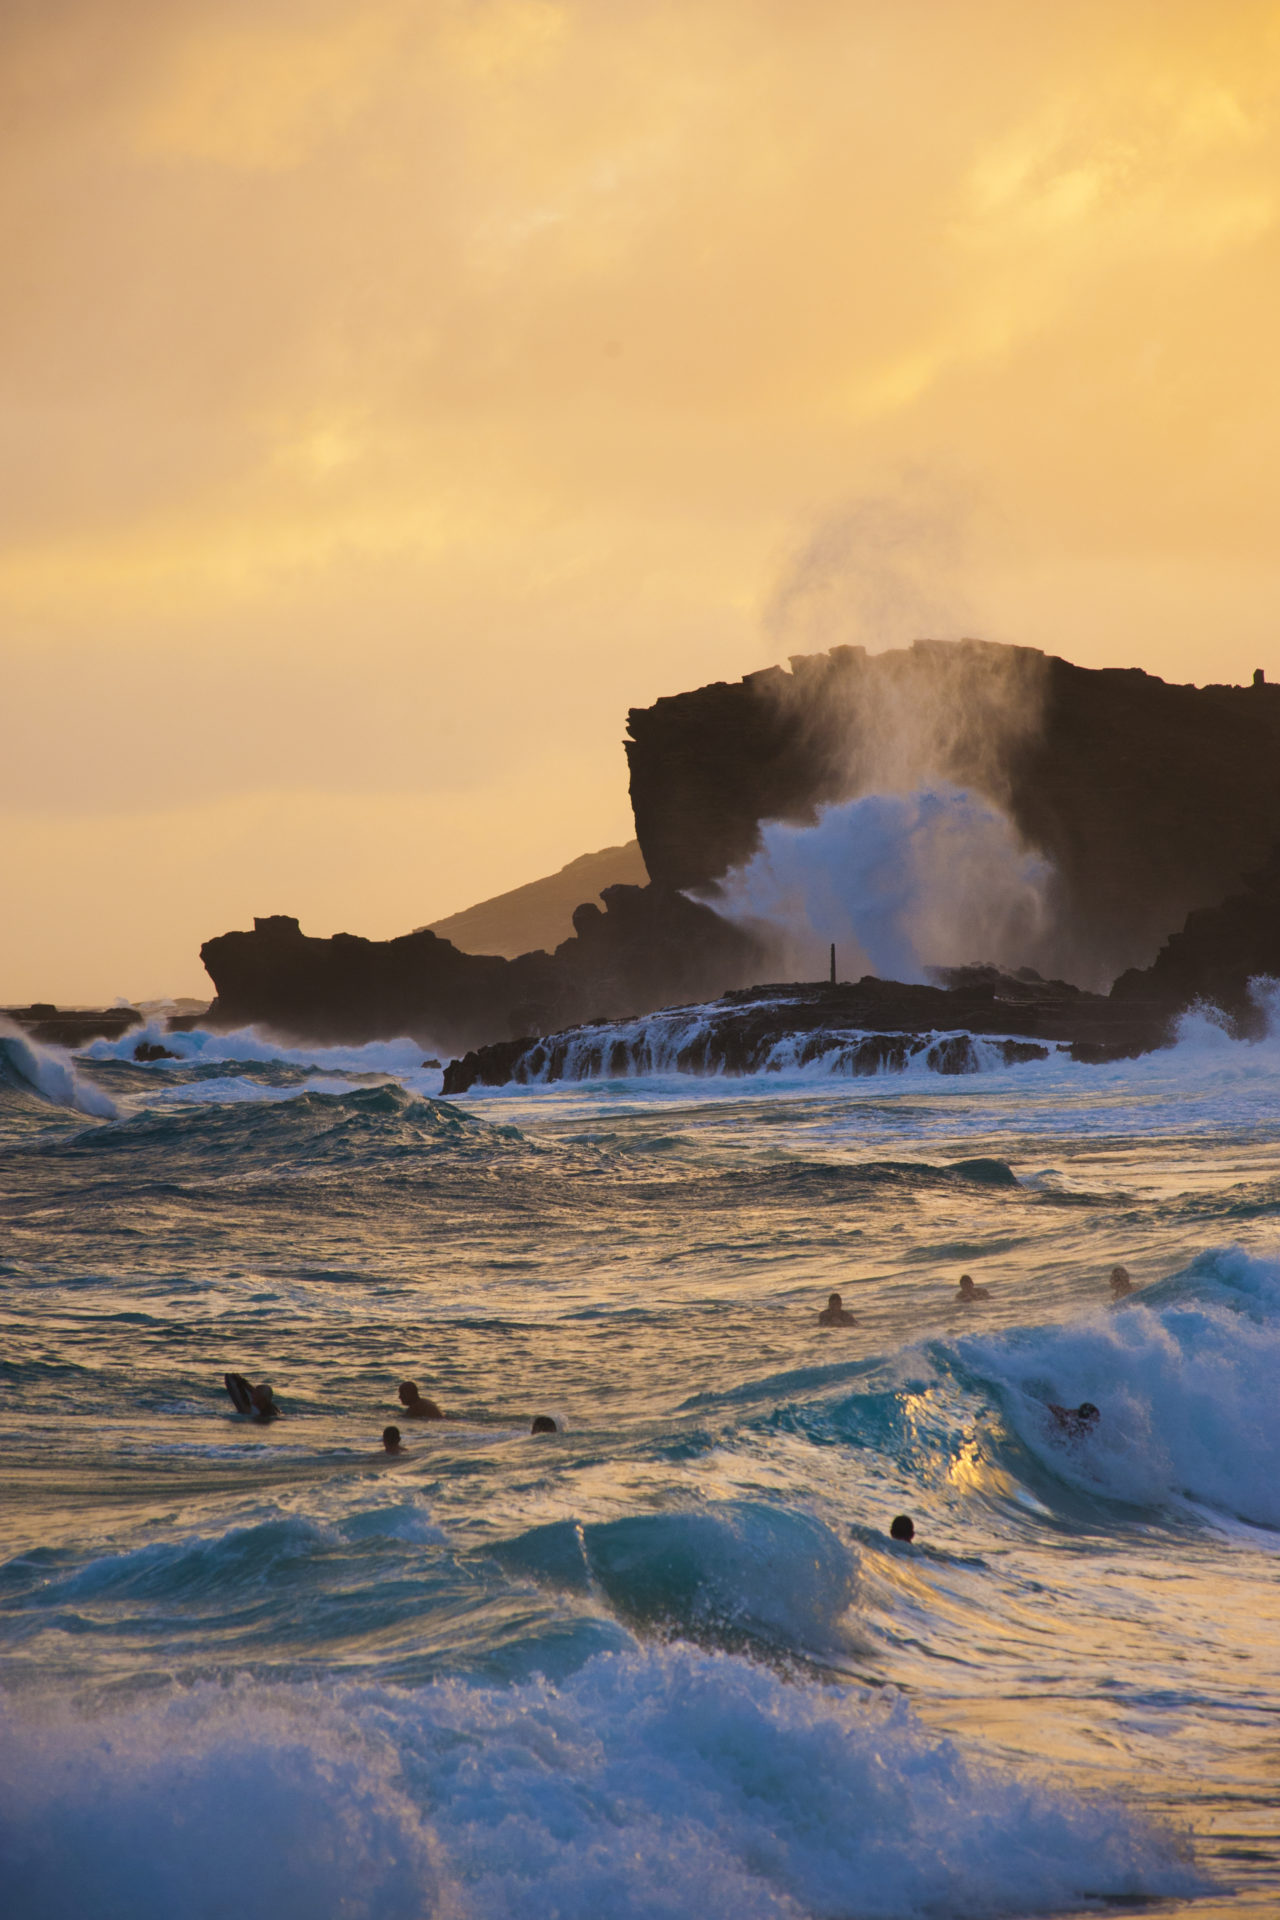 A stormy day at Sandy's beach and Halona blowhole during a winter swell. 